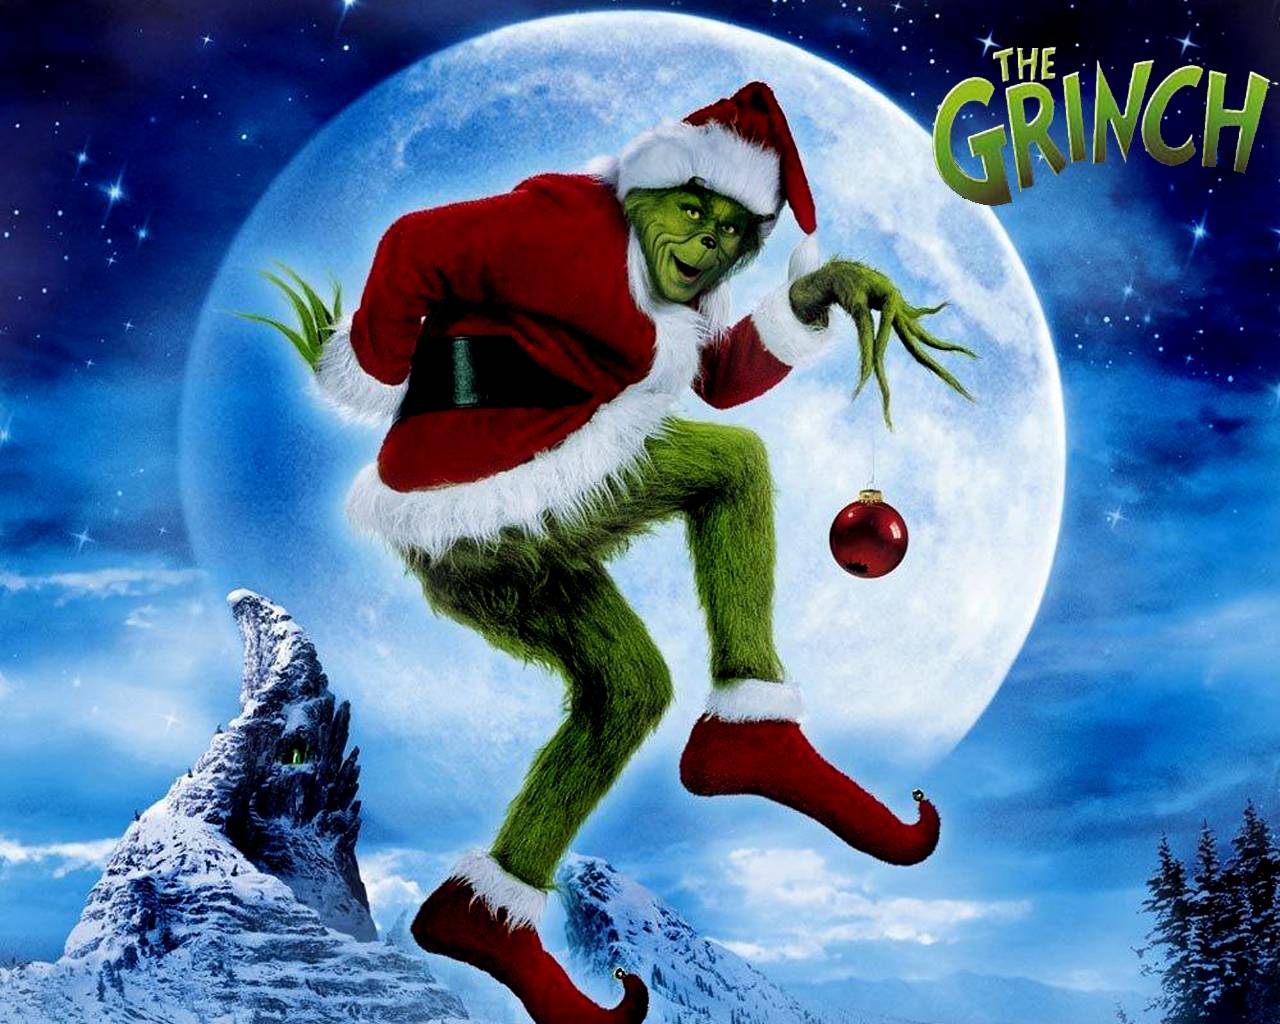 How the Grinch Stole Christmas Wallpaper. How the Grinch Stole Christmas Wallpaper, The Grinch Who Stole Christmas Wallpaper and How the Grinch Stole Christmas Background